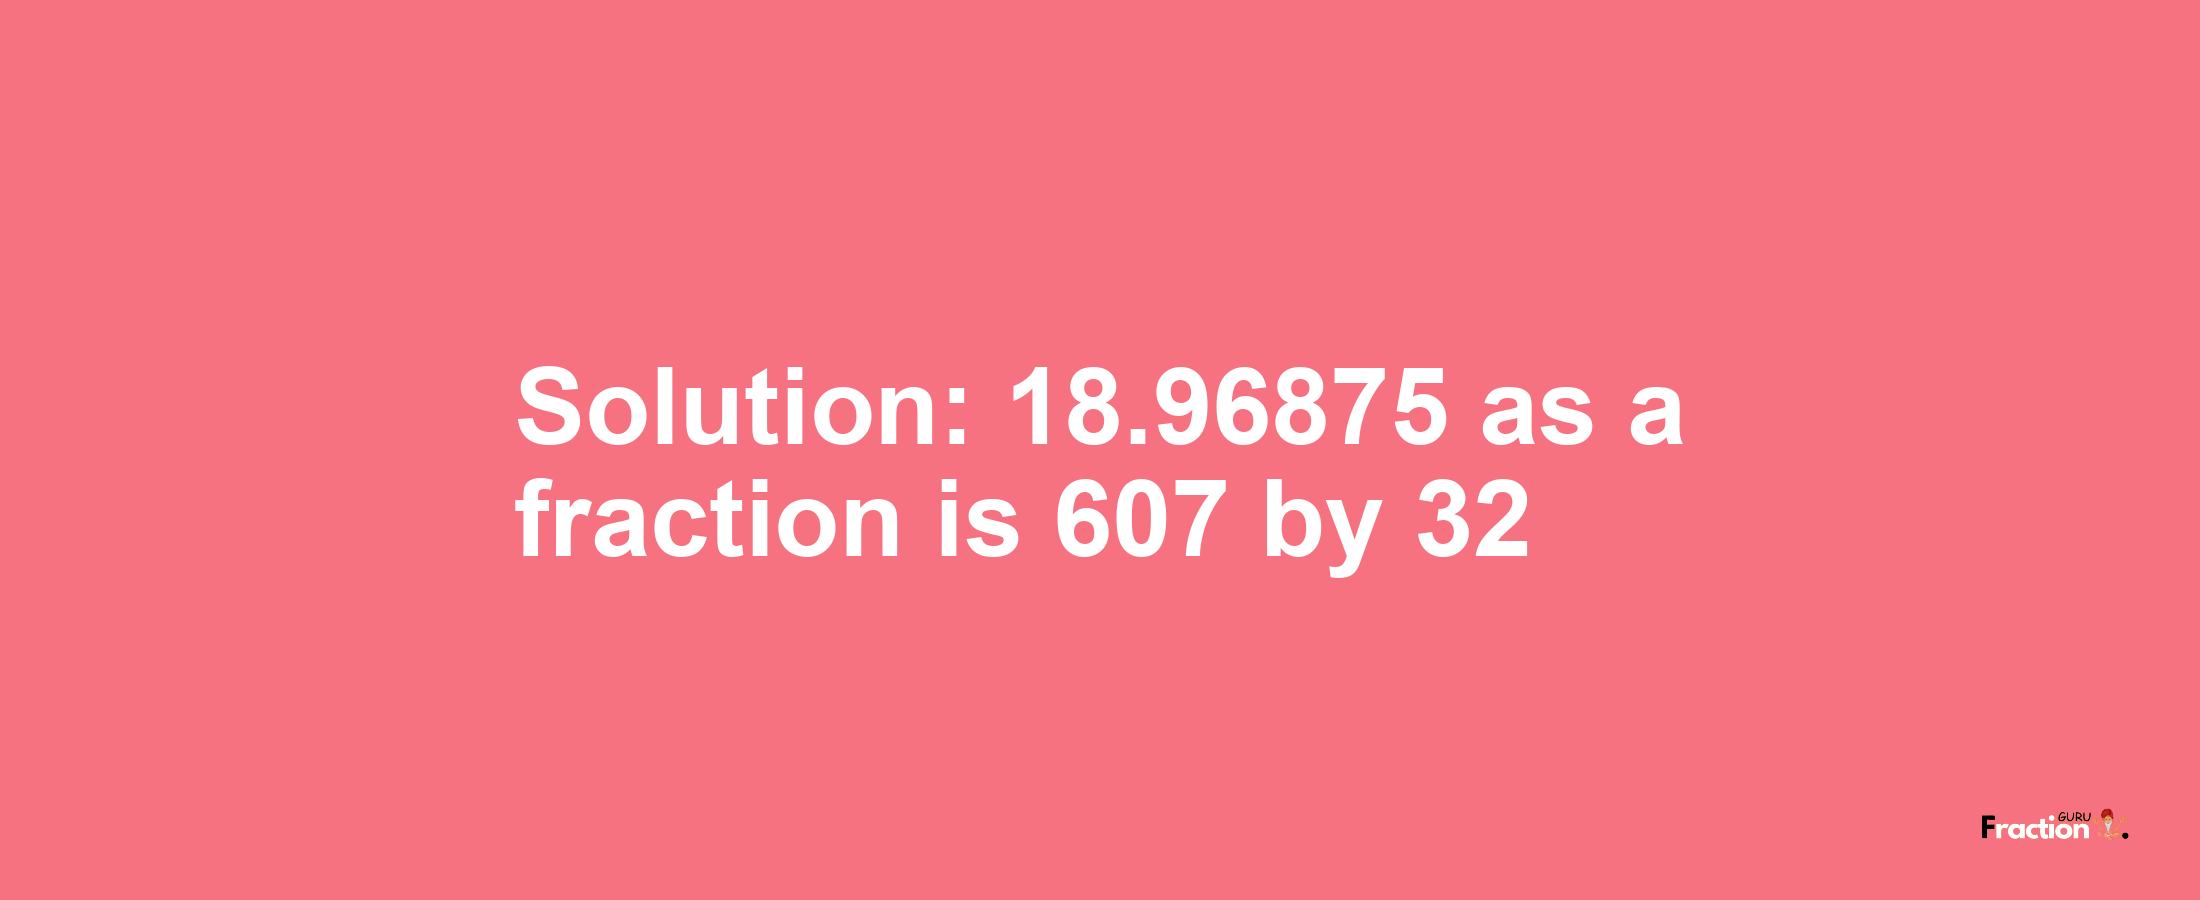 Solution:18.96875 as a fraction is 607/32